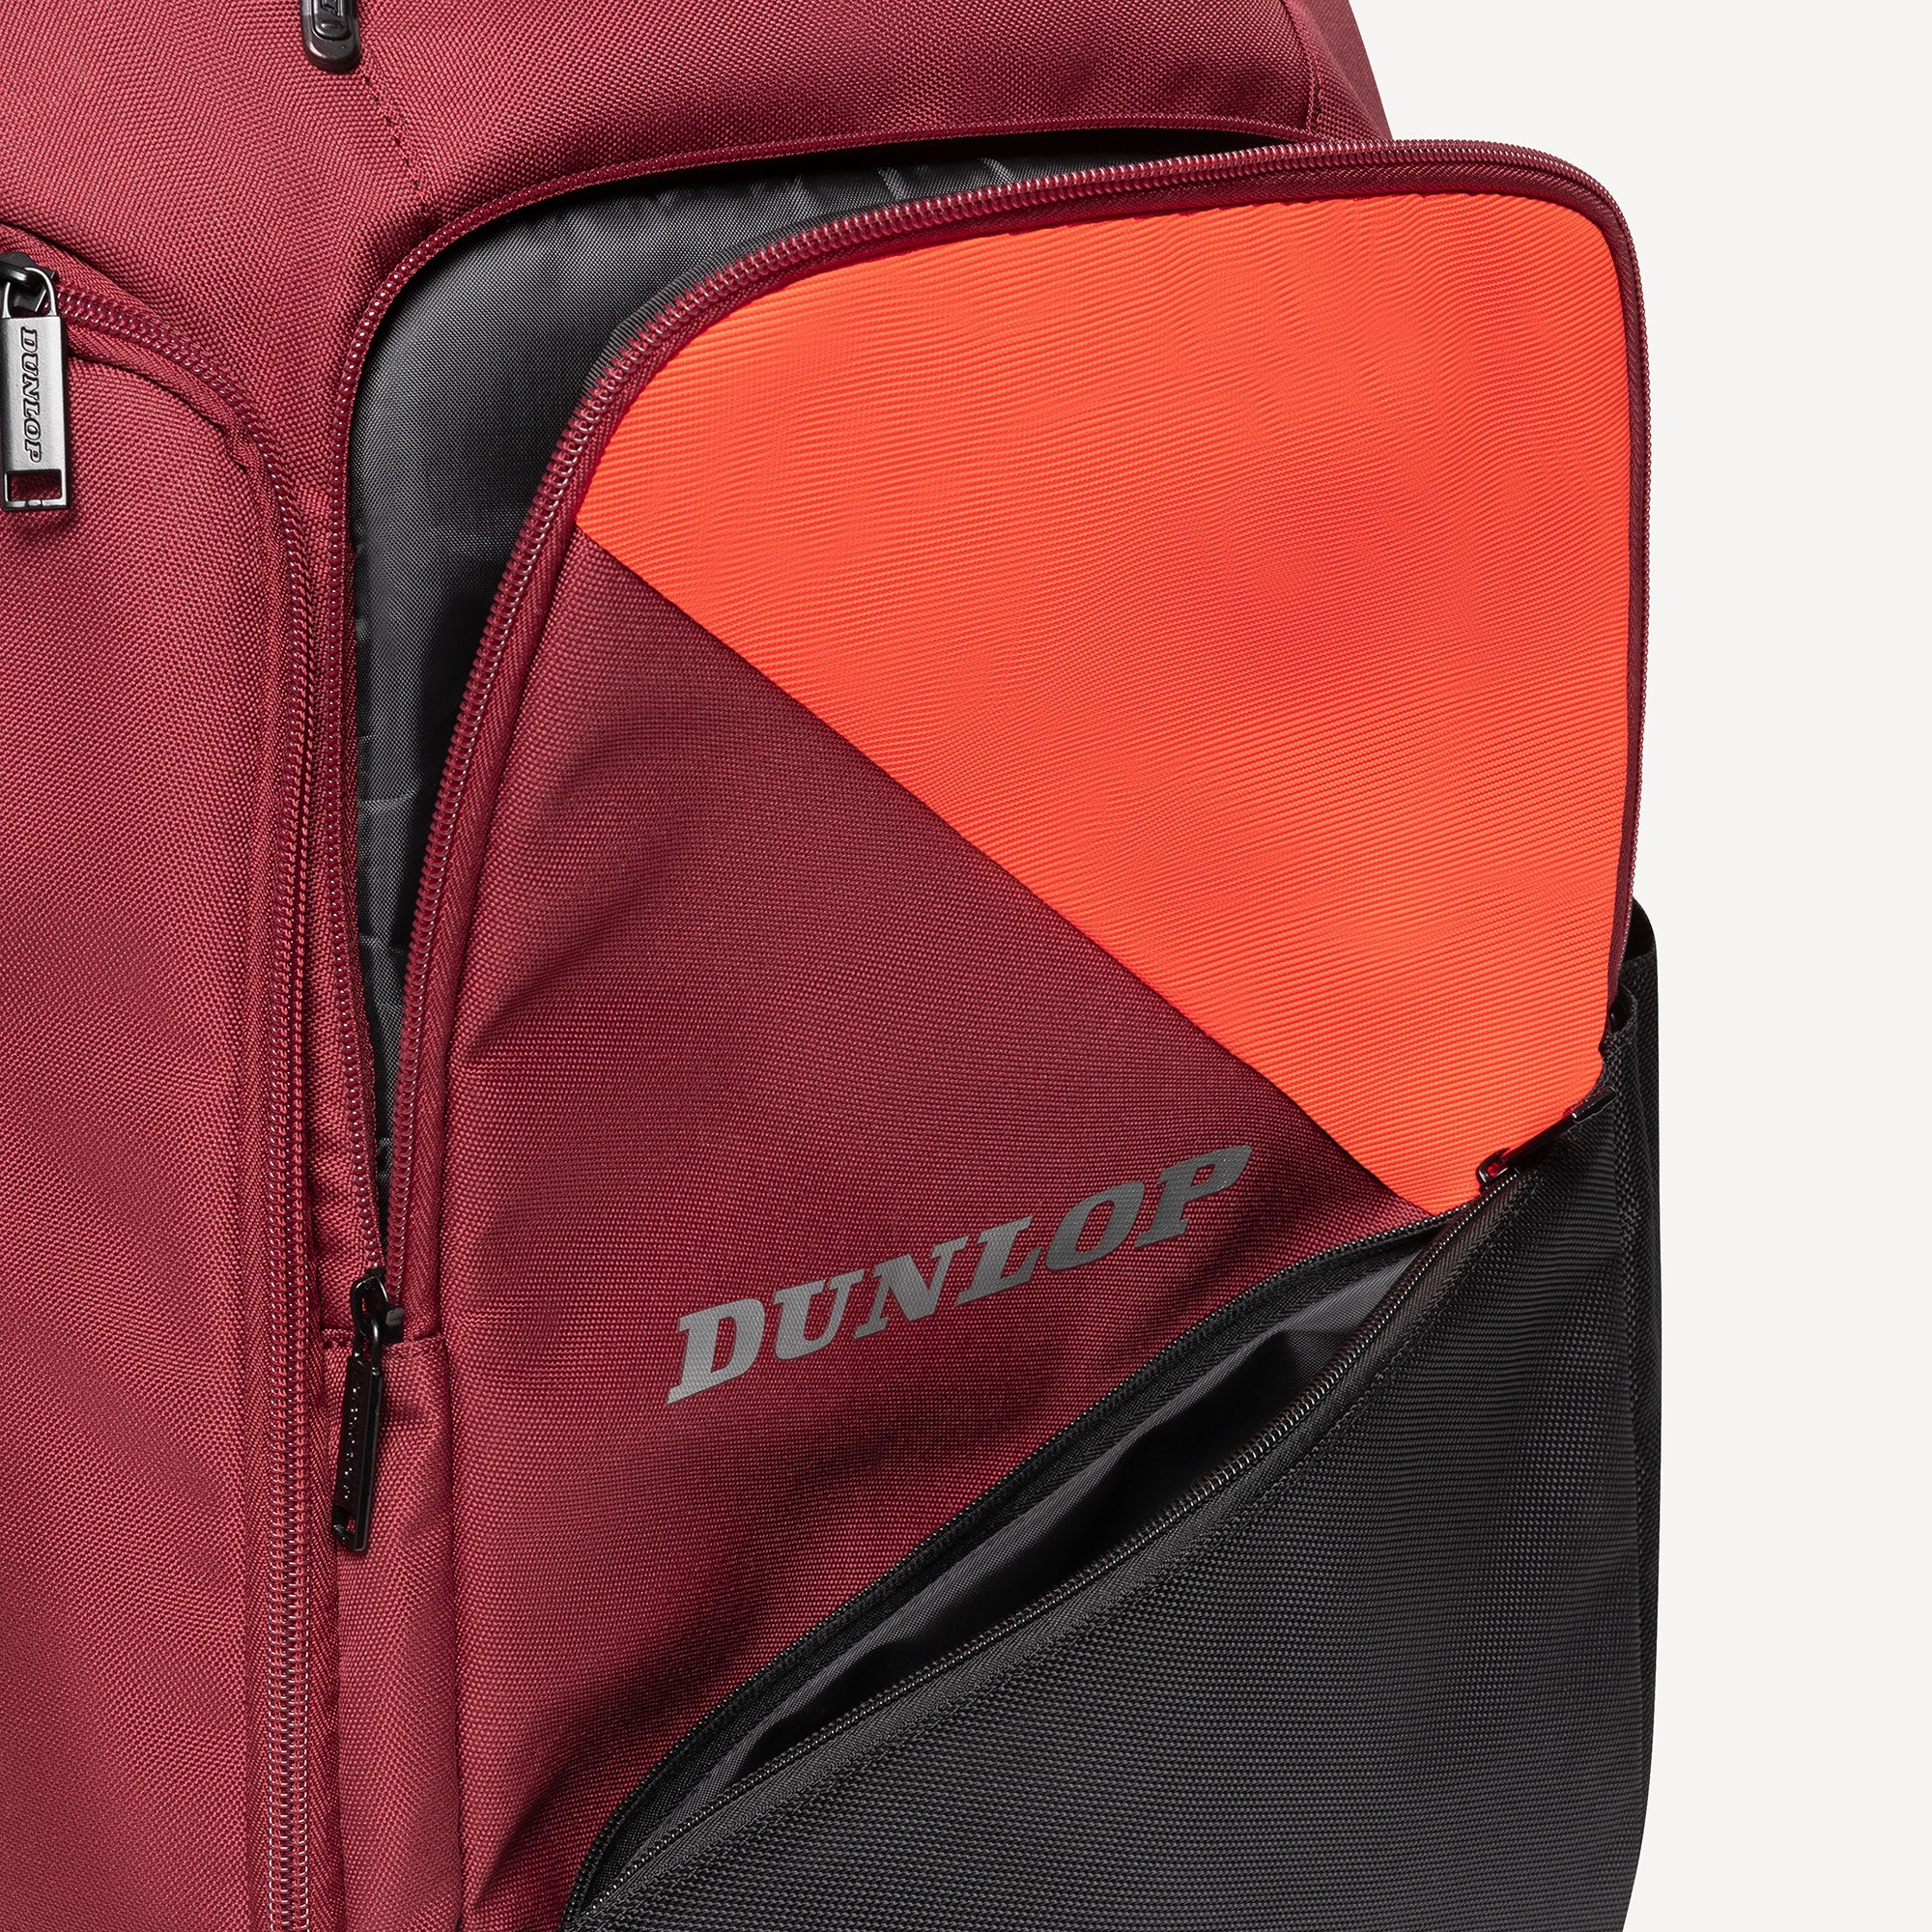 Dunlop CX Performance Tennis Backpack - Red (7)